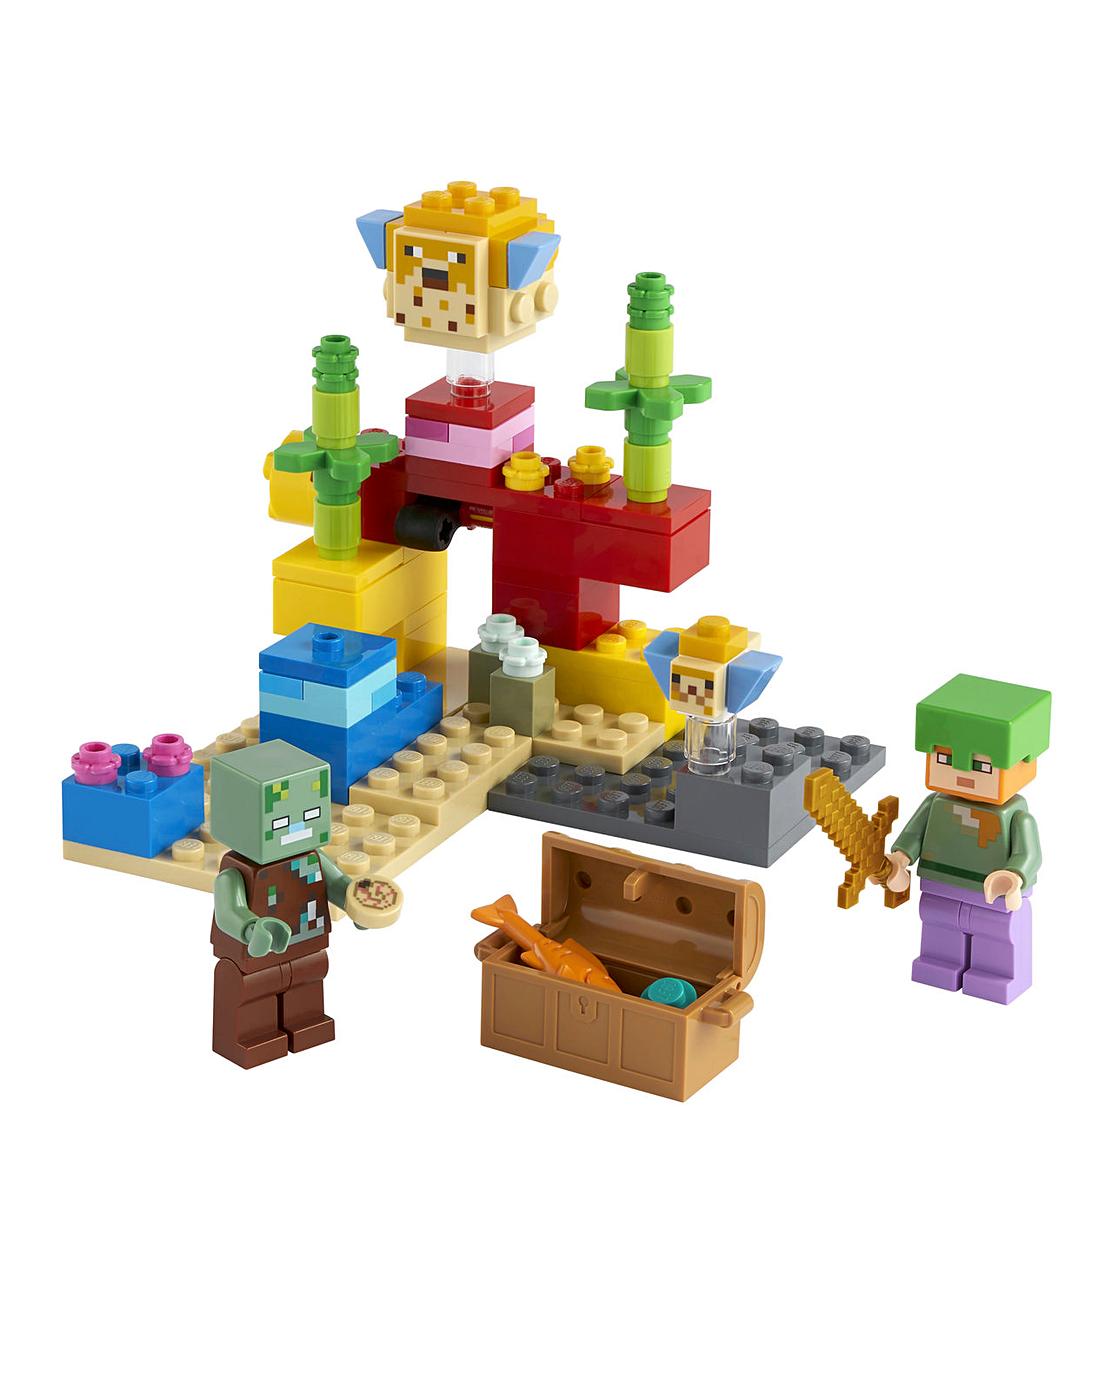 LEGO Minecraft The Coral Reef